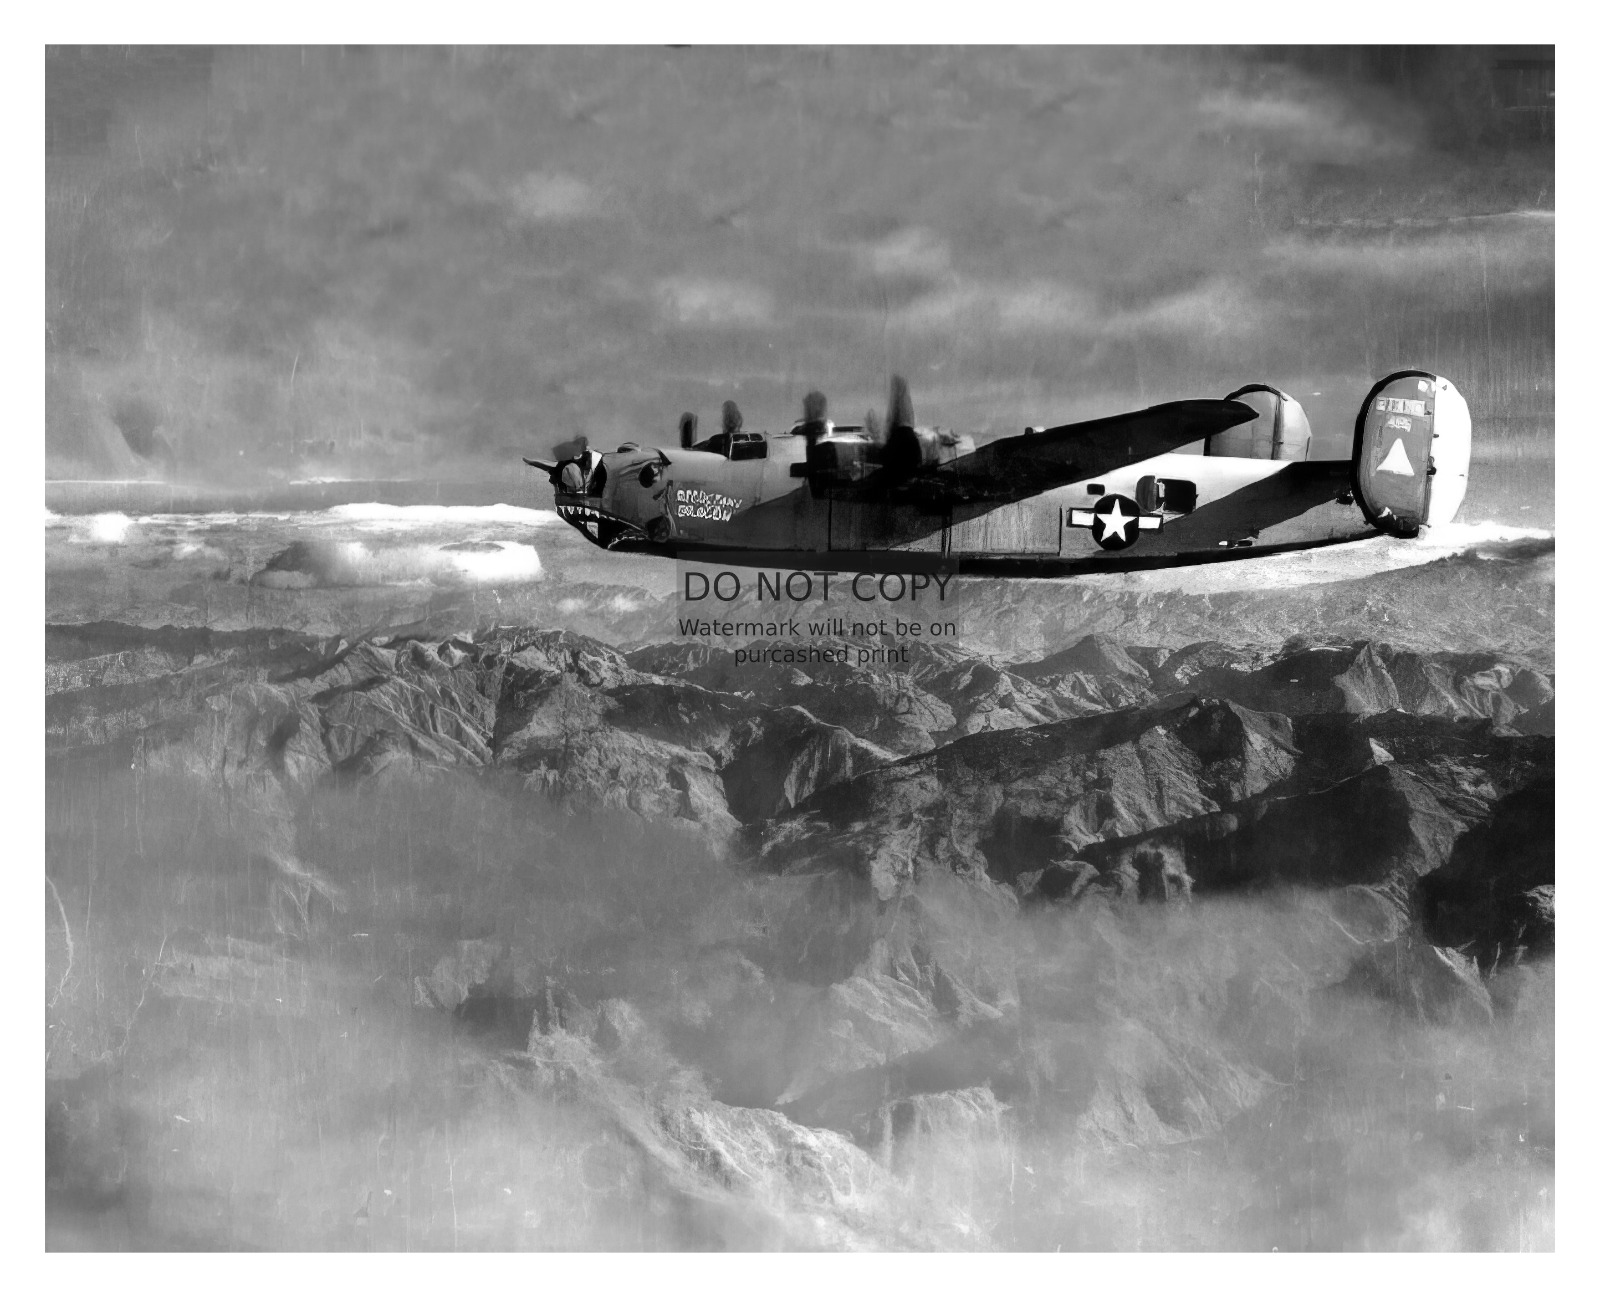 CONSOLIDATED B-24 LIBERATOR HEAVY BOMBER IN FLIGHT 8X10 WW2 WWII PHOTO